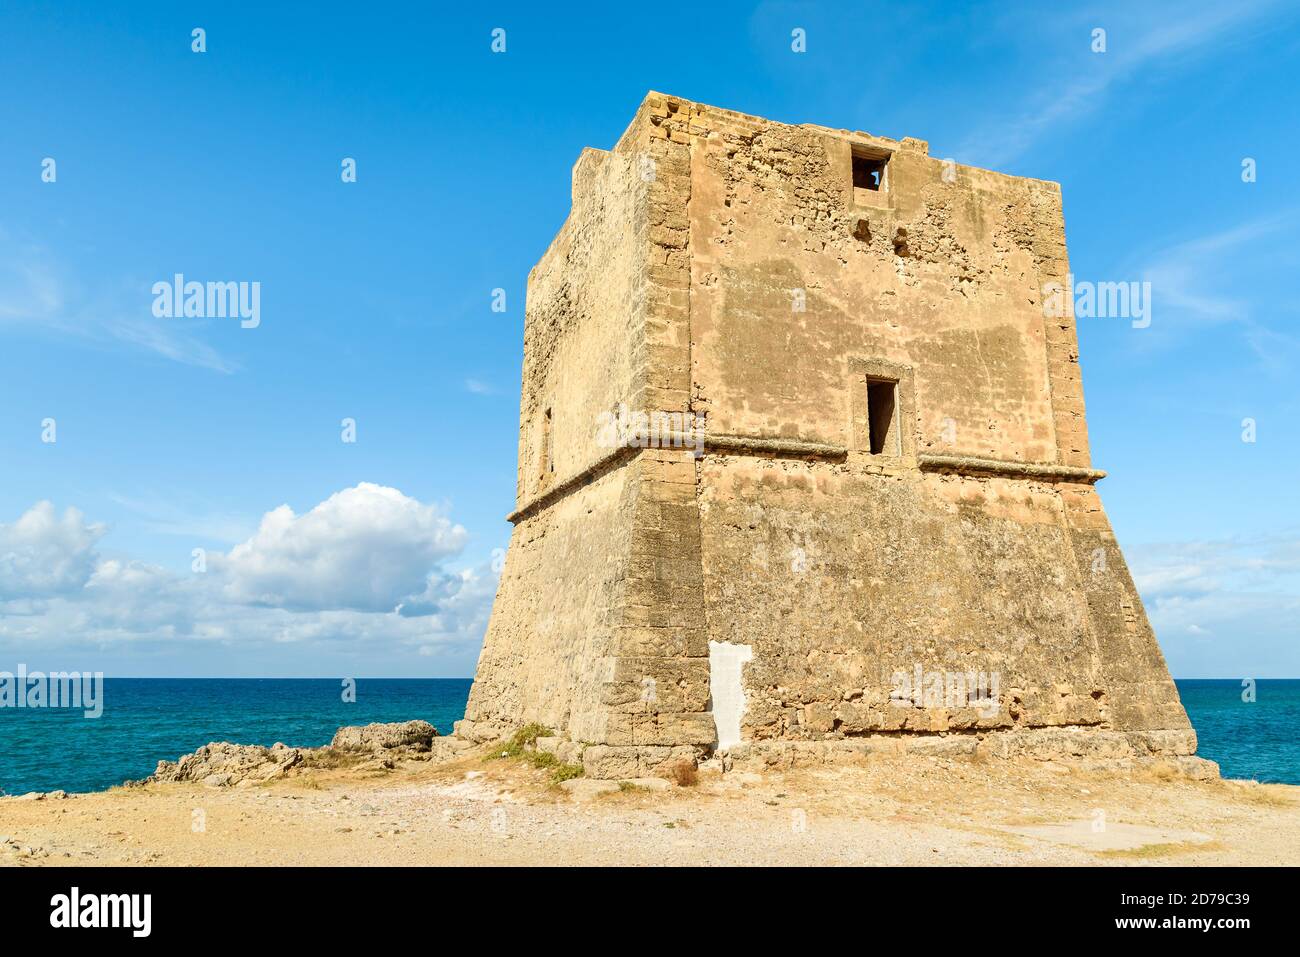 View of Ancient Tower Mulinazzo, located inside the Falcone e Borsellino Airport of Punta Raisi in the province of Palermo, Cinisi, Italy Stock Photo